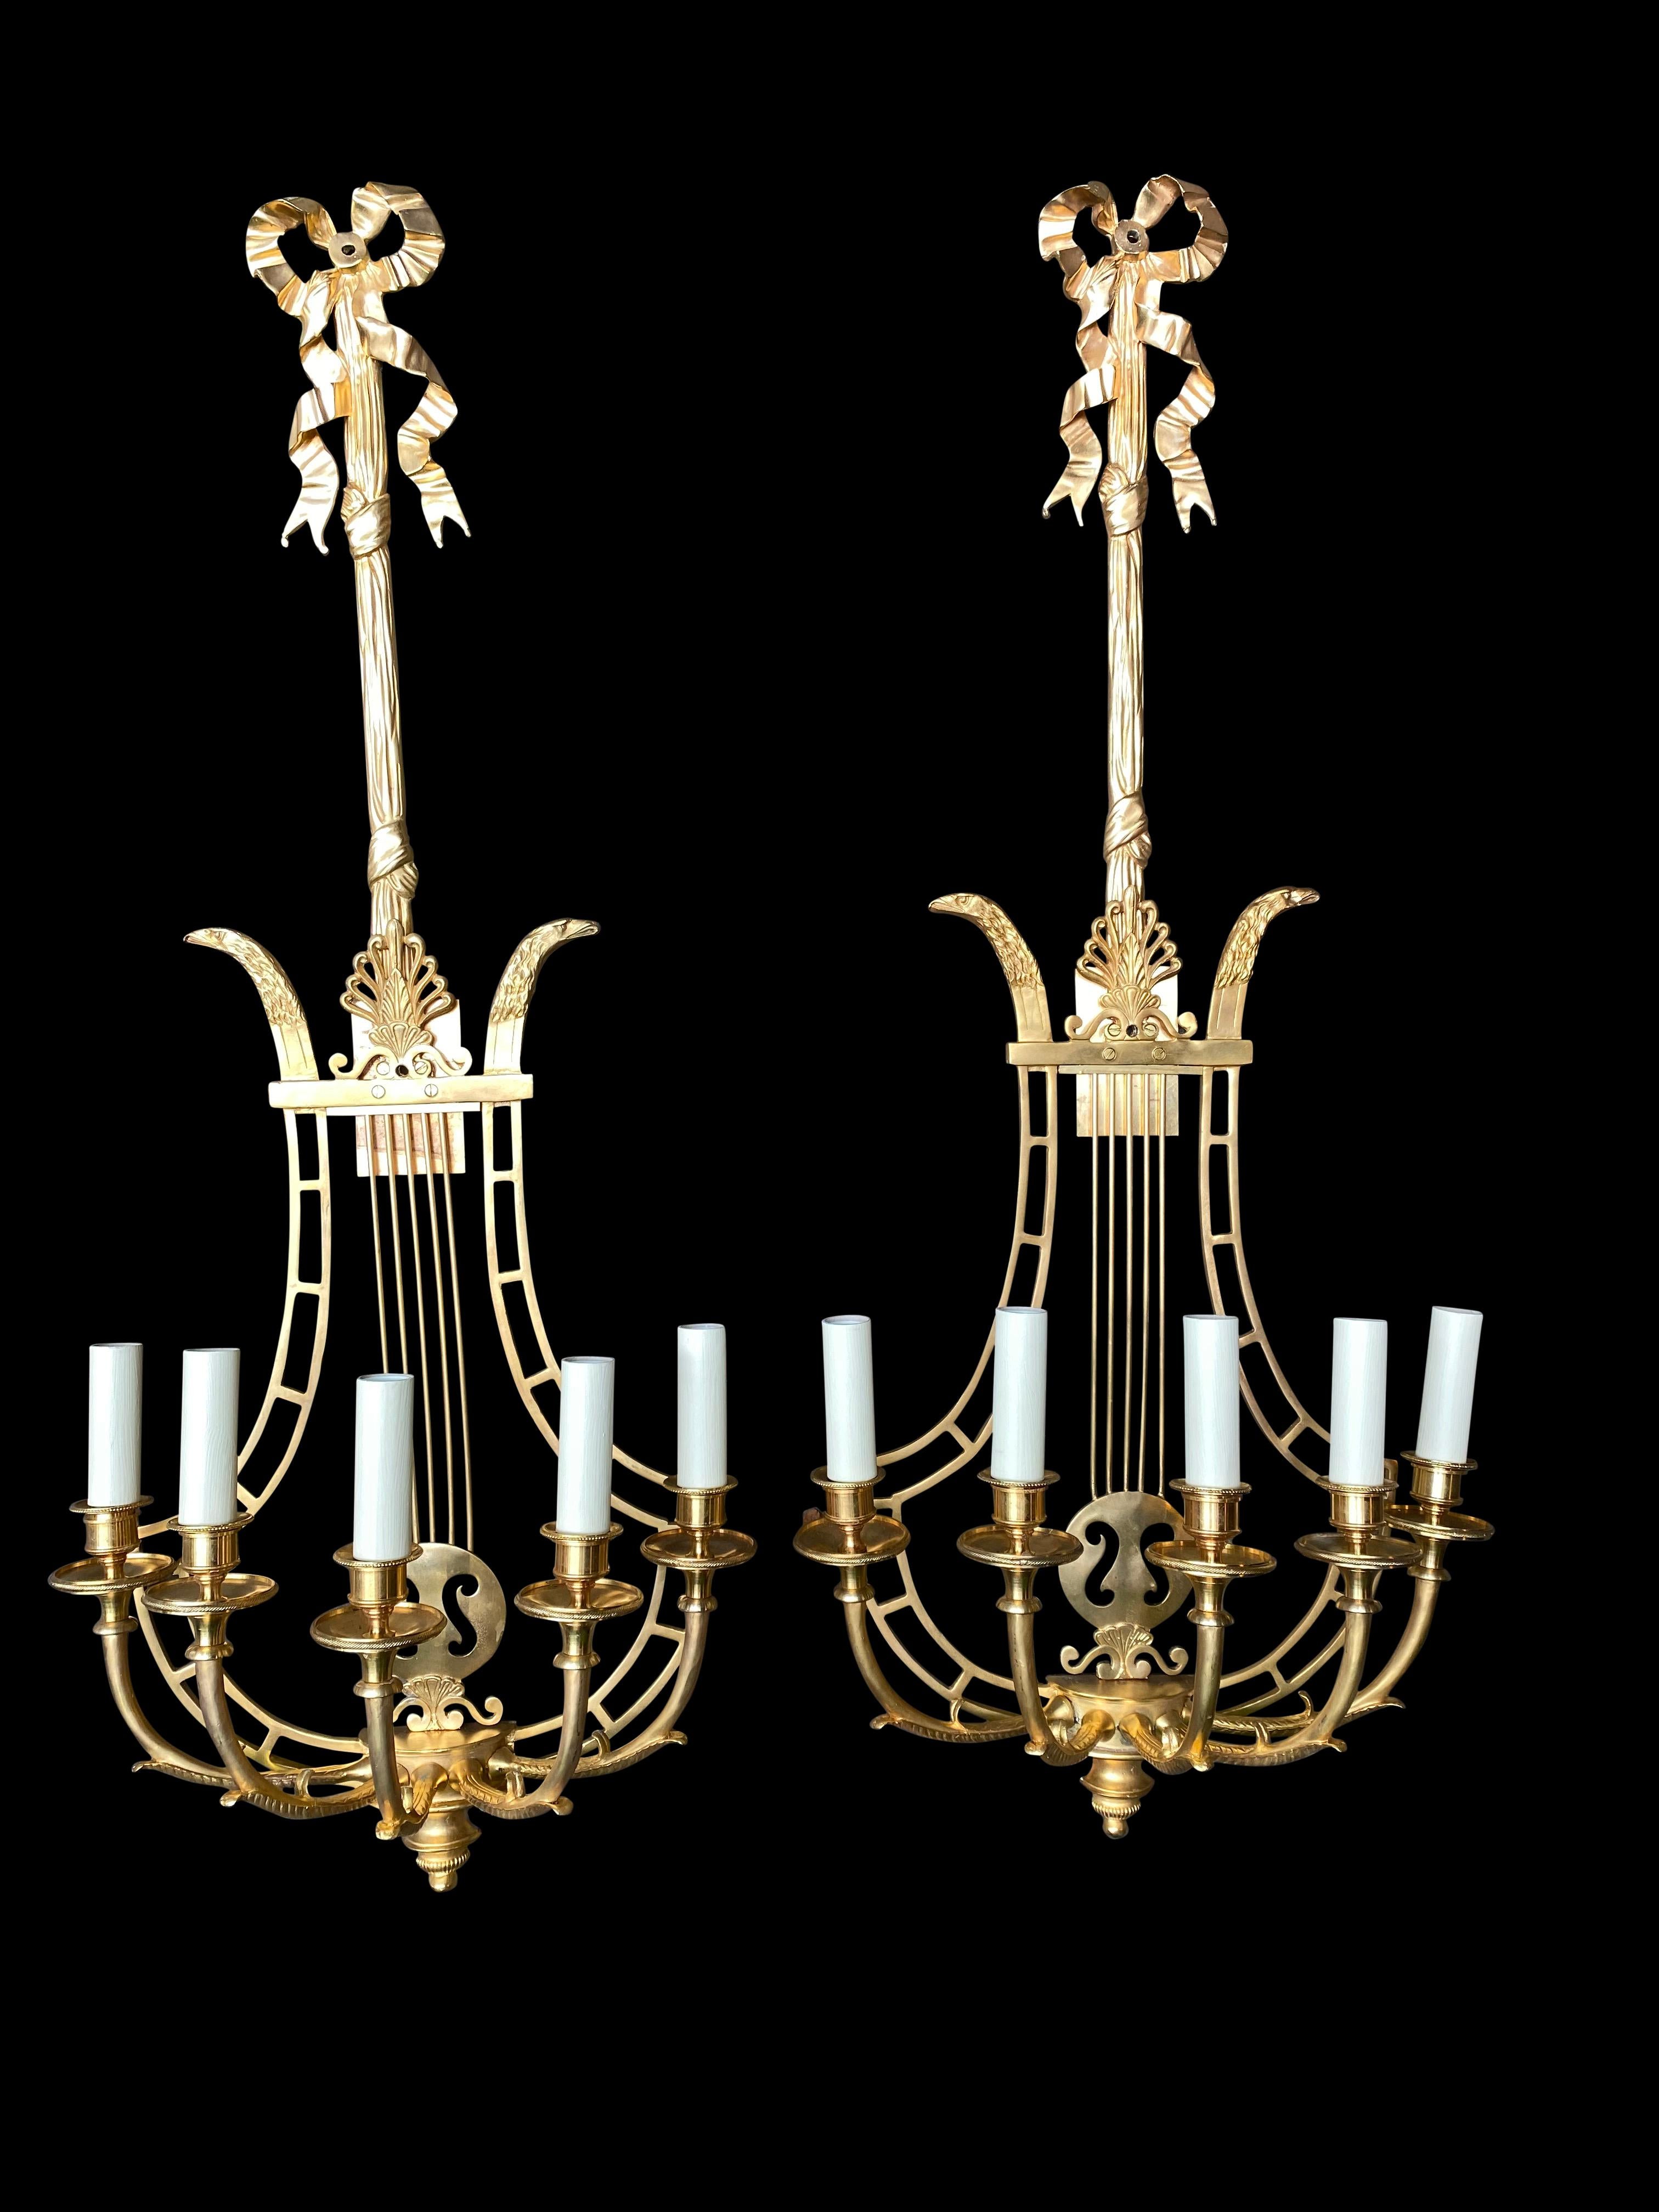 Empire sconces, French ormolu wall light candelabras Lyre, 20th century. Taking the form of a lyre, these really would add style to any room or interior. Good size at over three feet tall - 93 CM. Long hanging surmounted by ribbon.